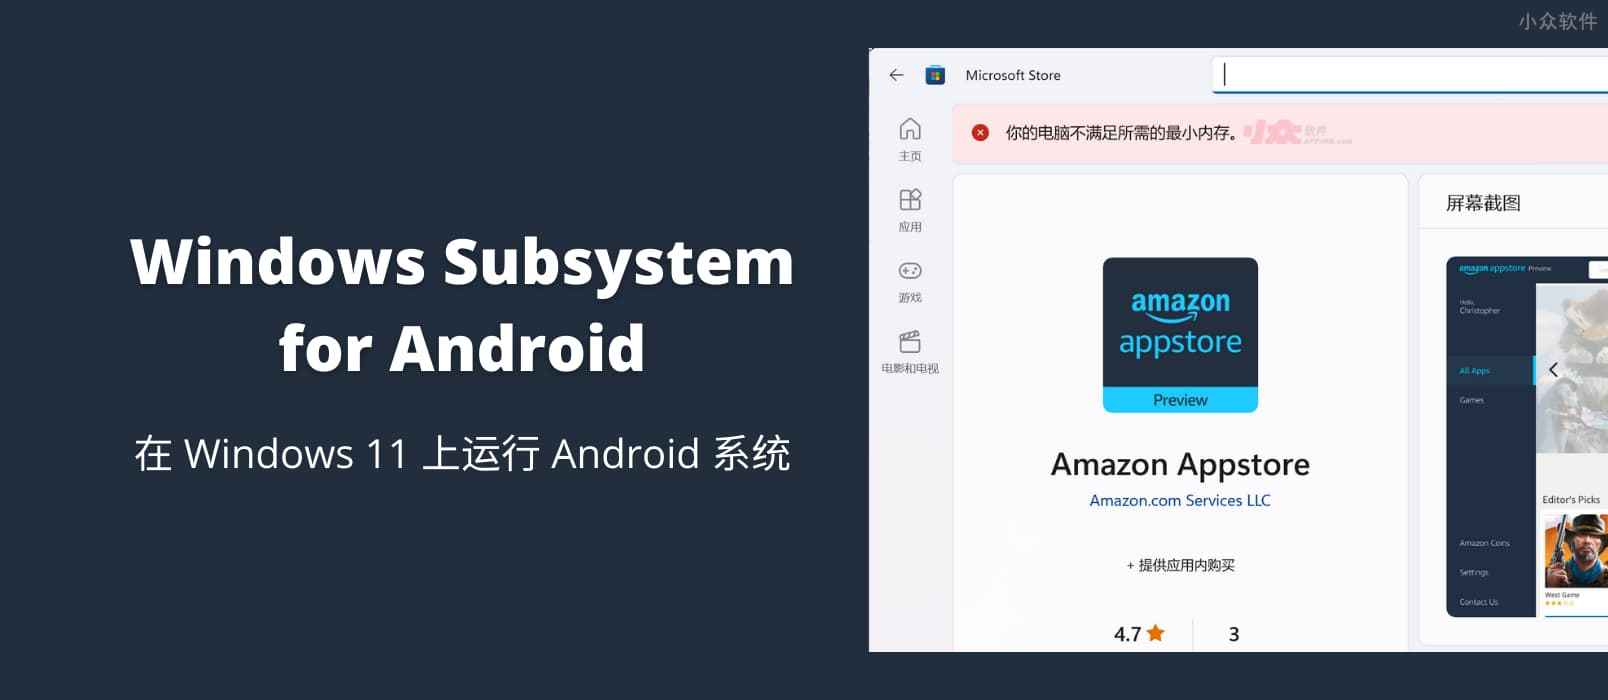 Windows Subsystem for Android 下载地址，在 Windows 11 上运行 Android 系统